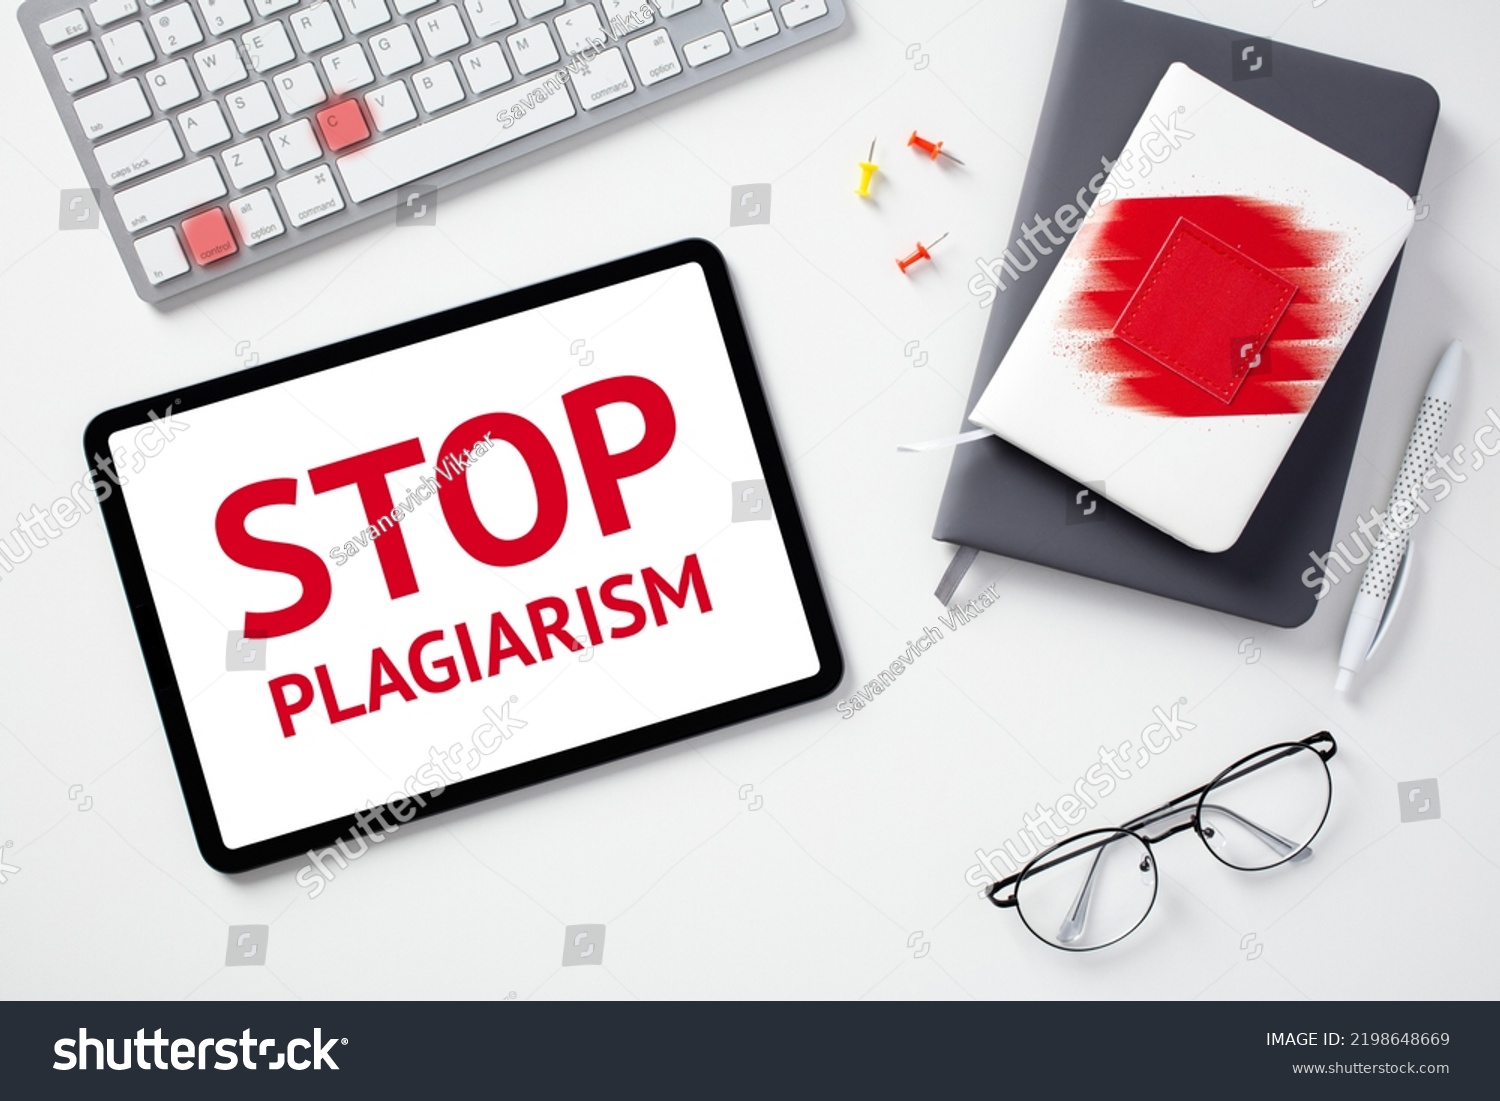 Stop plagiarism concept. Flat lay digital tablet with text STOP PLAGIARISM on screen, keyboard with lighted keys control c, paper notebooks, glasses on white desk. #2198648669